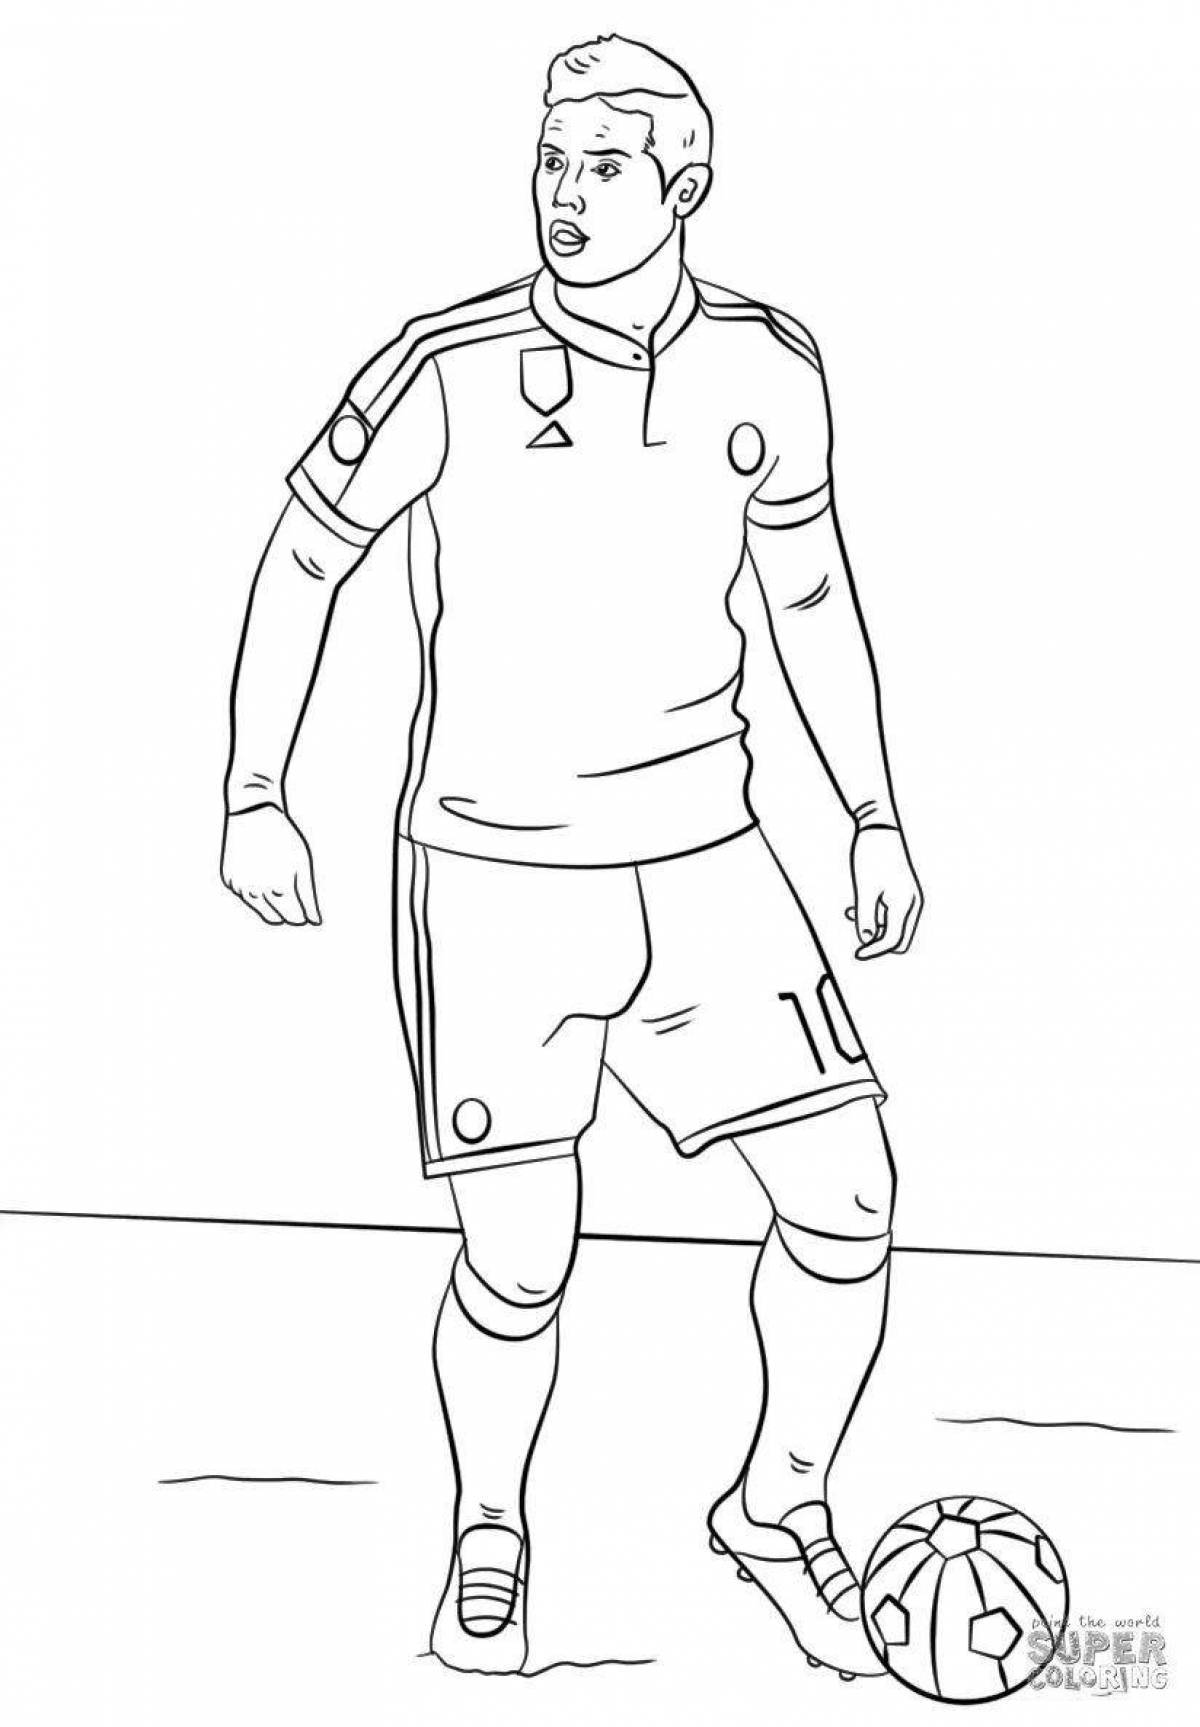 Coloring book sports football players